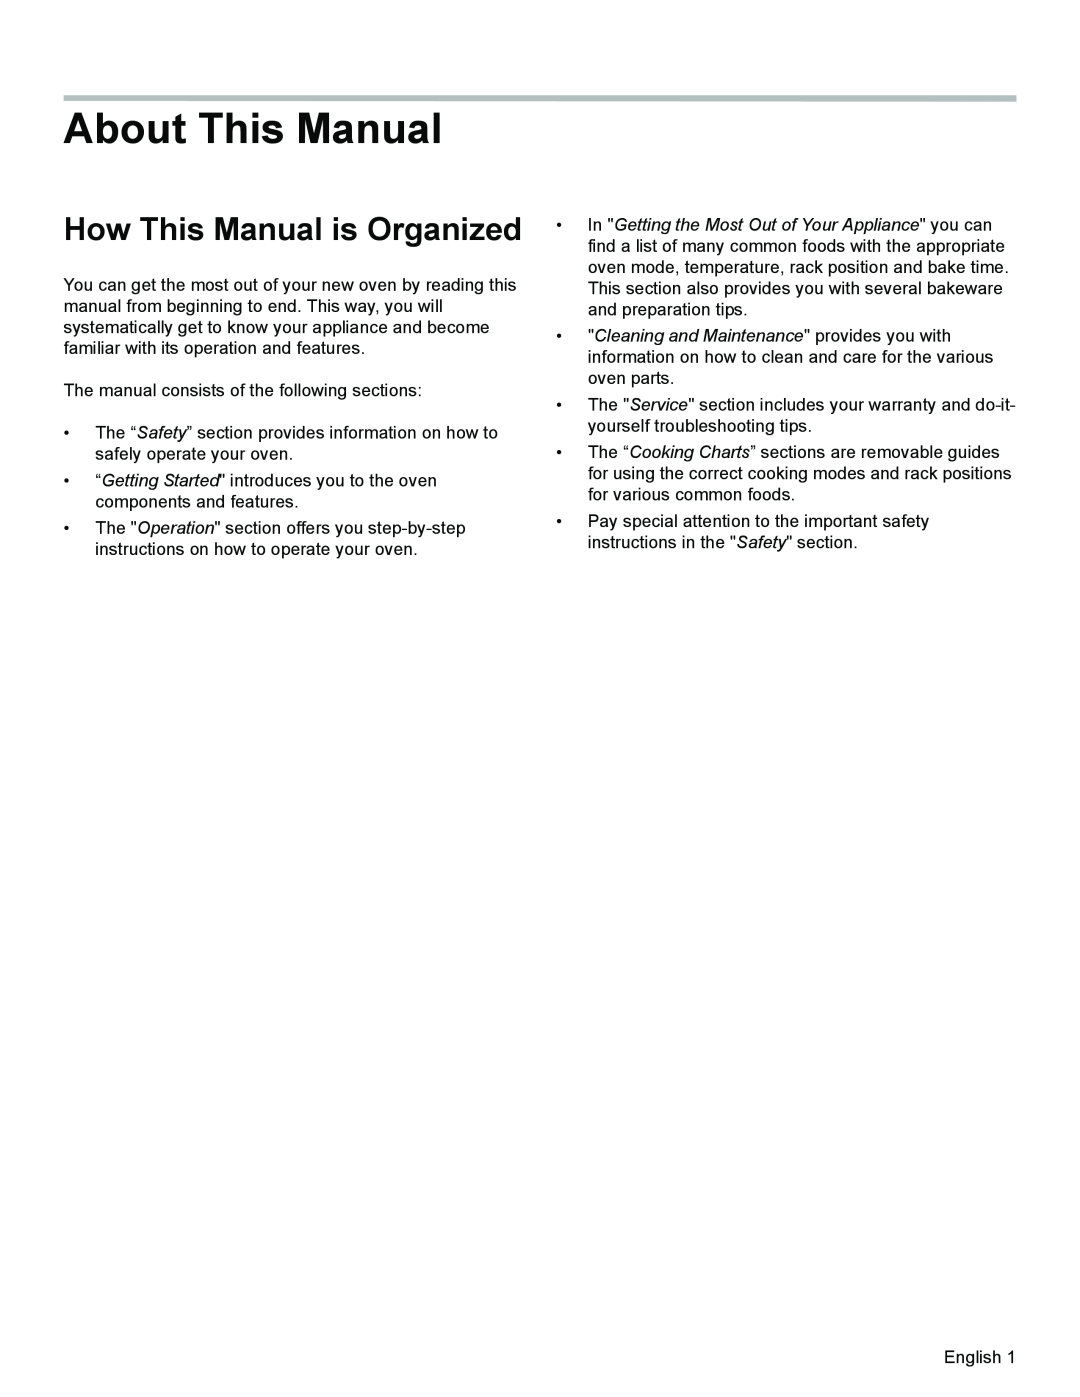 Thermador PODM301, PODMW301 manual About This Manual, How This Manual is Organized 